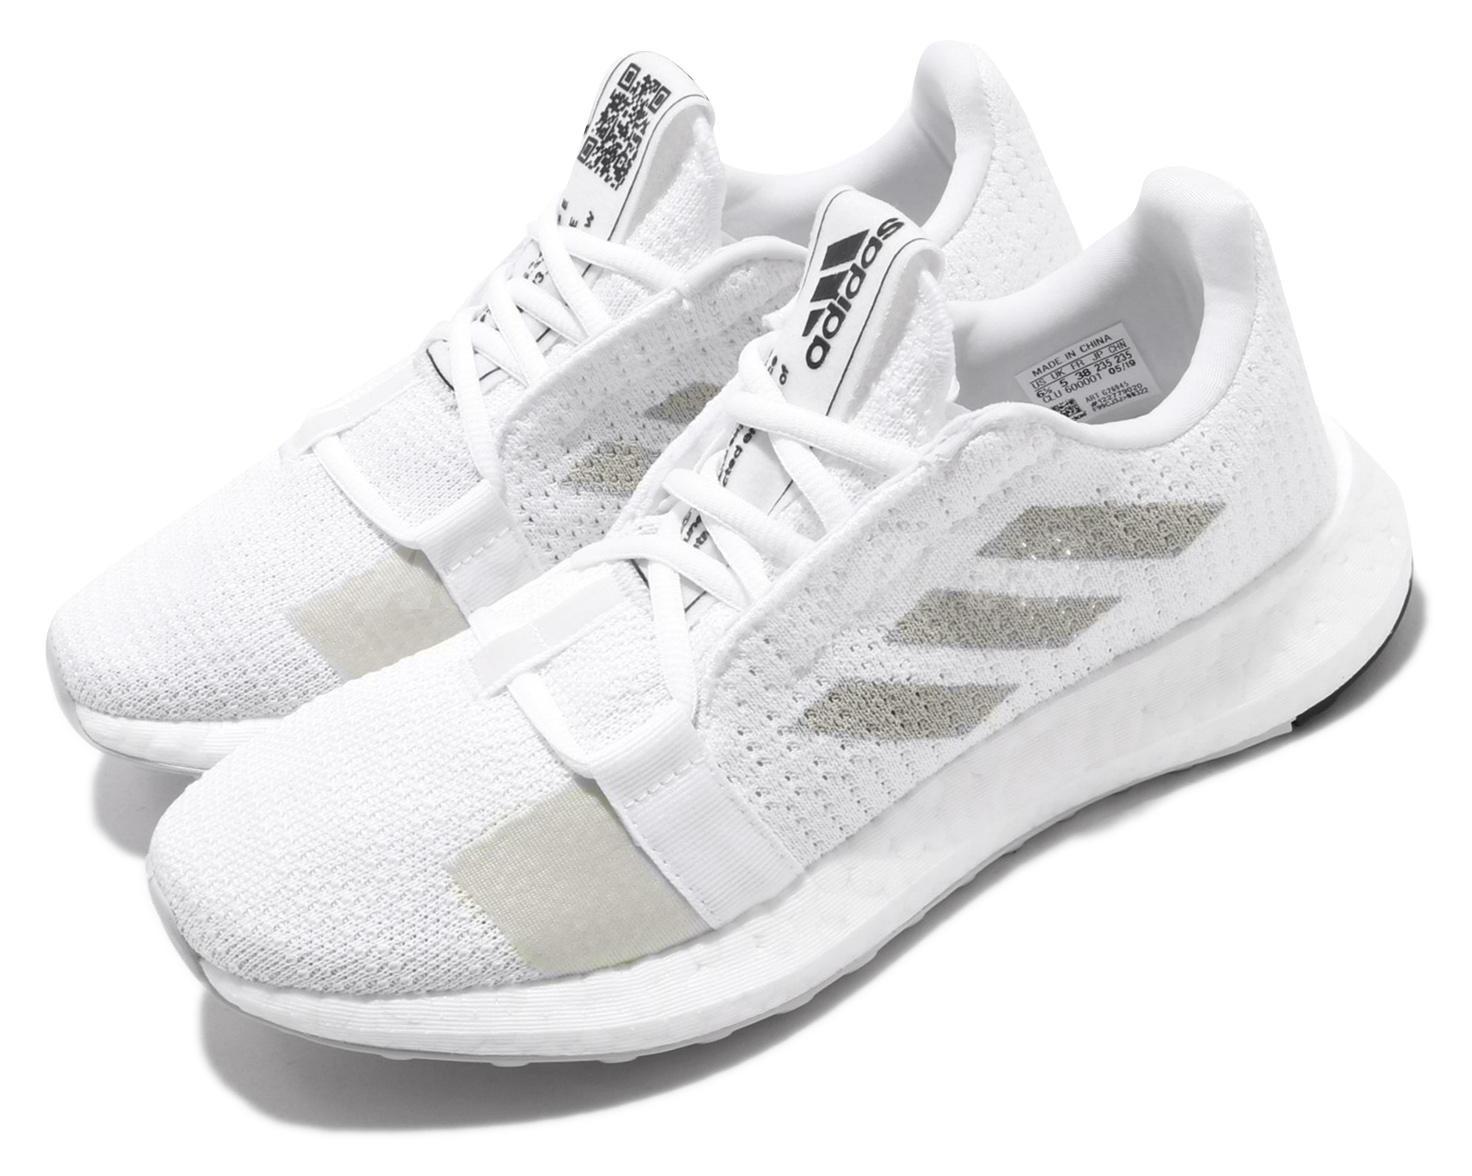 adidas Mens Senseboost GO Running Shoes for $34.39 Shipped